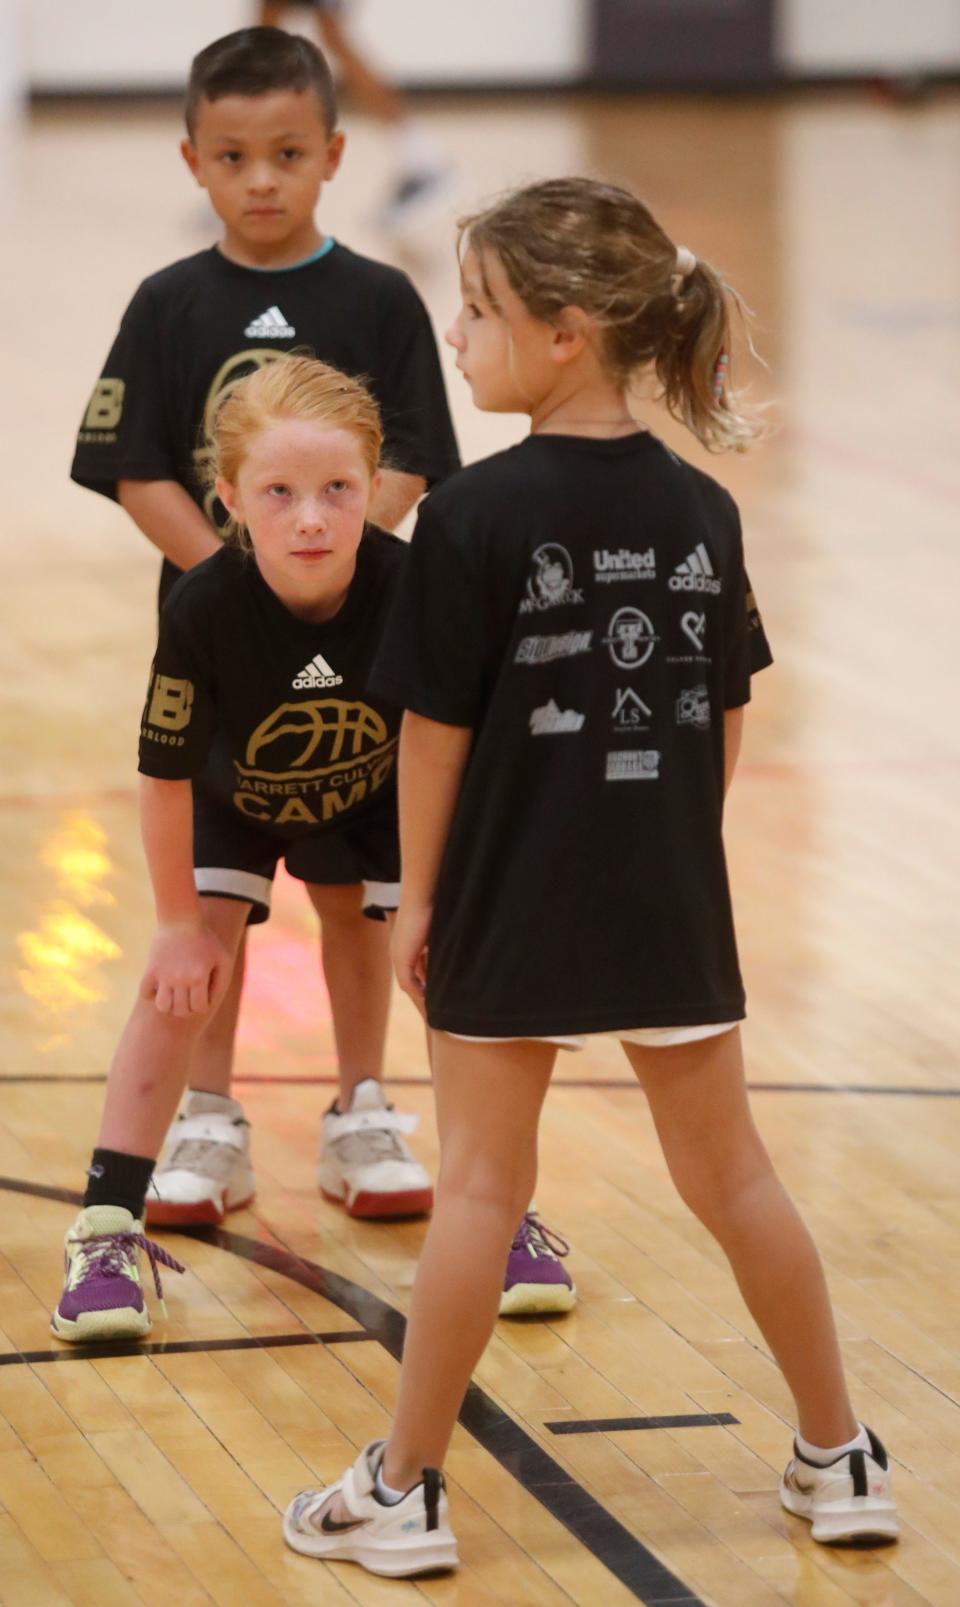 Ten-year-old Bryce Anderson and 7-year-old Sawyer Cepeda go through drills at the Jarrett Culver Basketball Camp at the Apex Event Center on Tuesday, July 19, 2022. (Mark Rogers/For A-J Media)